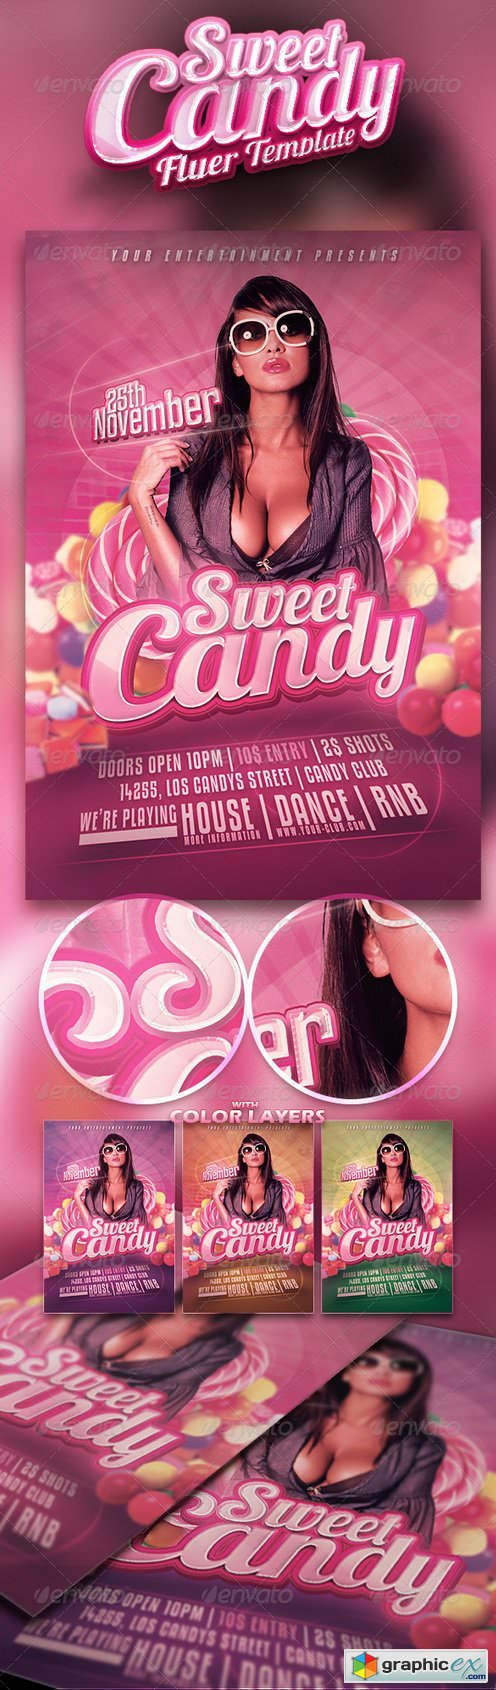 Sweet Candy Flyer Vol. 3